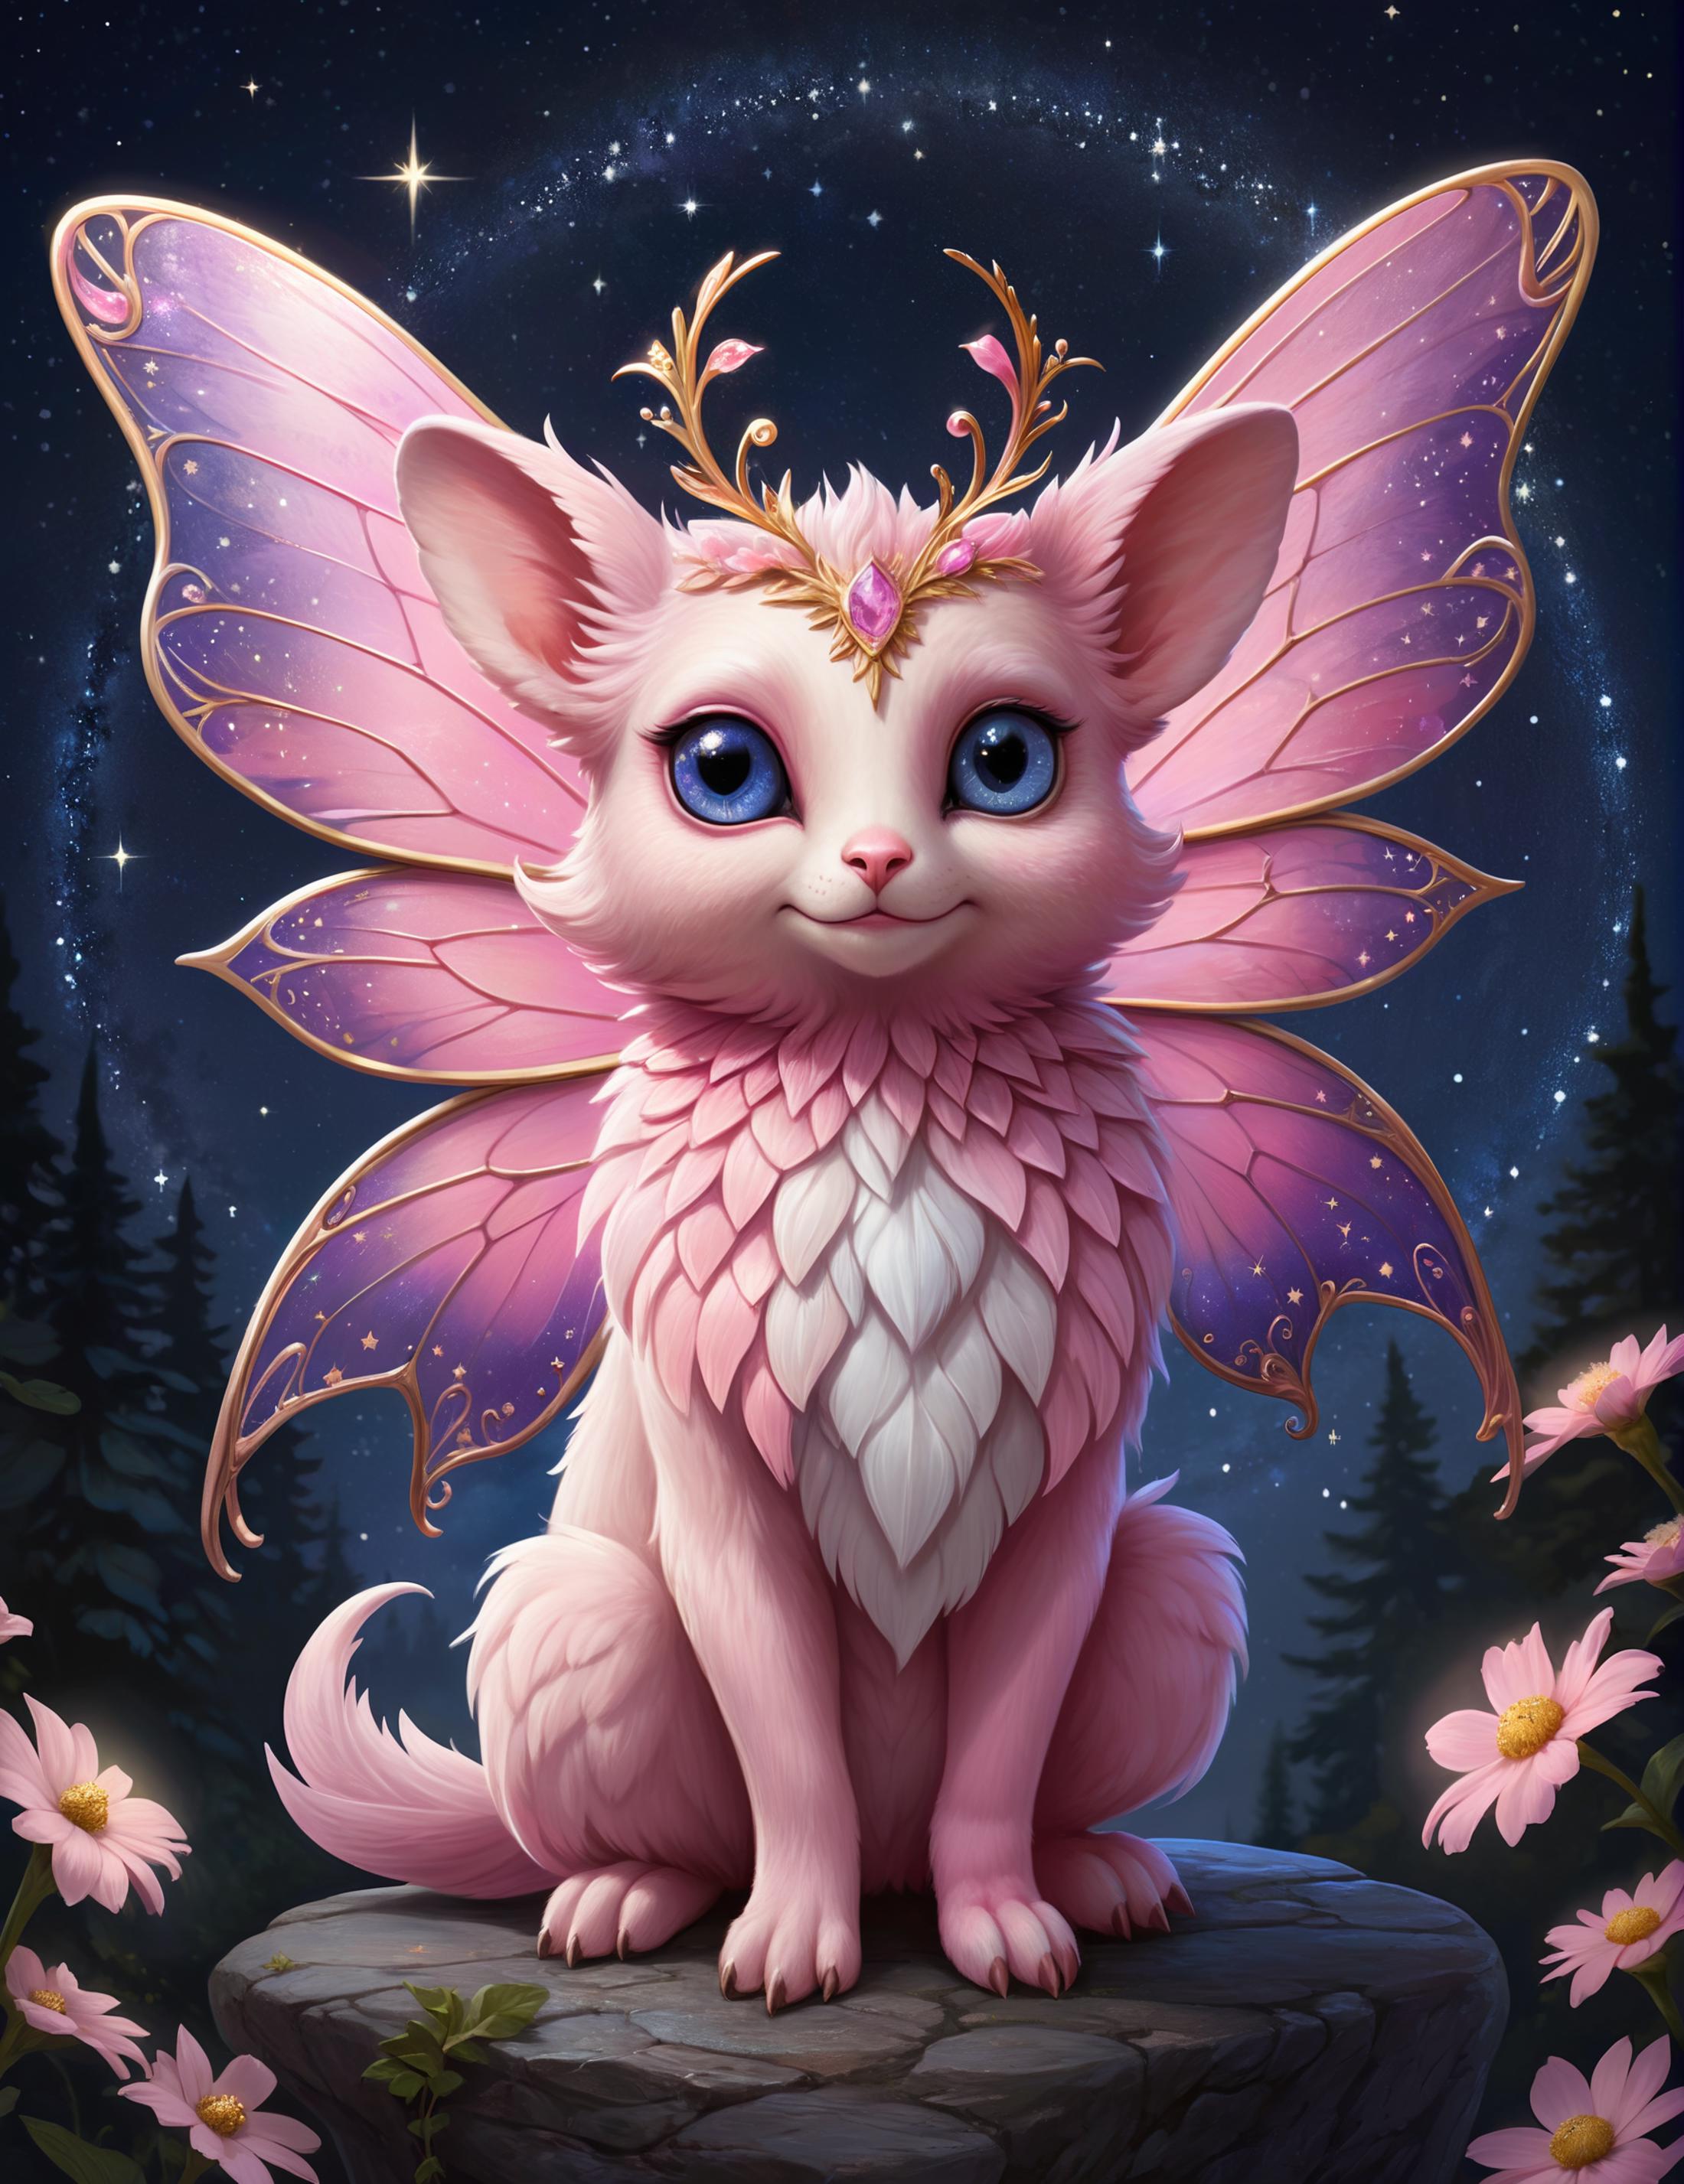 A pink and white cat with a crown sitting on a rock under a starry sky.